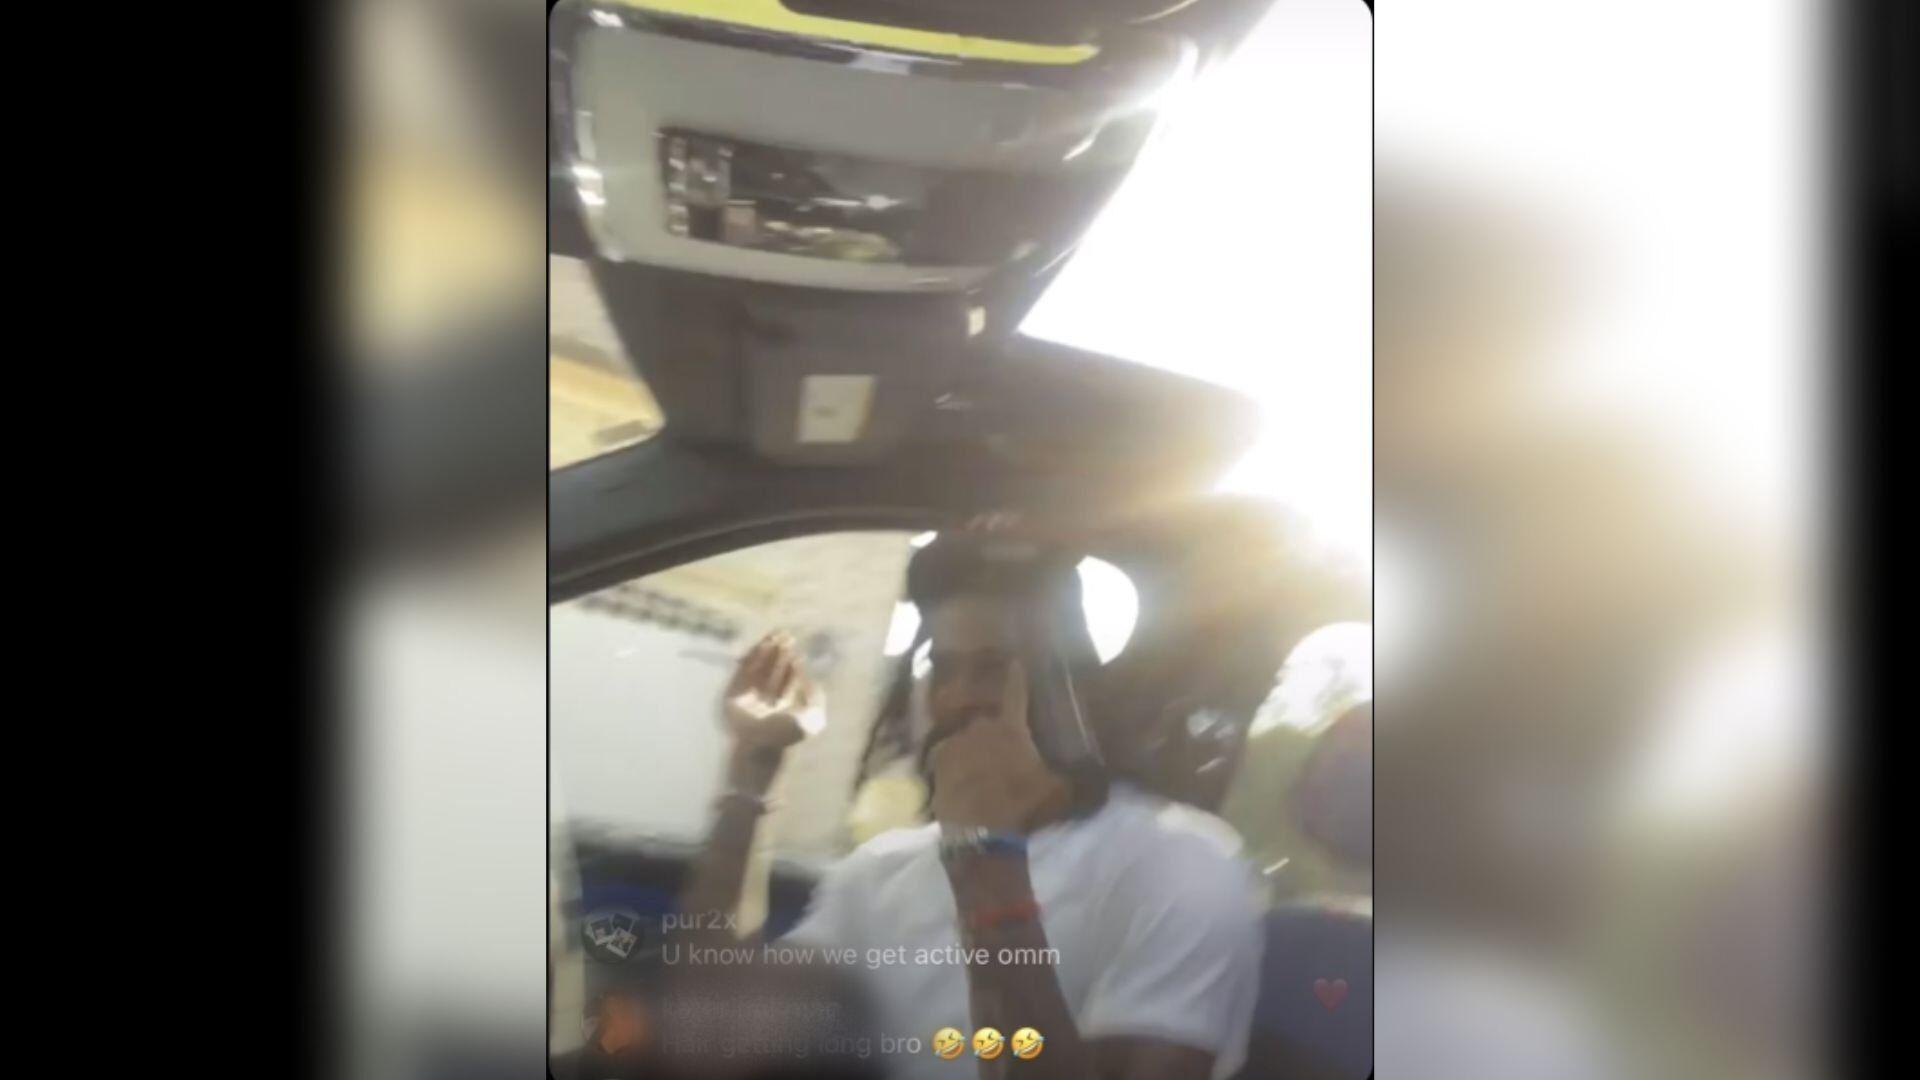 Ja Morant shows how a 'good guy with a gun' can never be Black